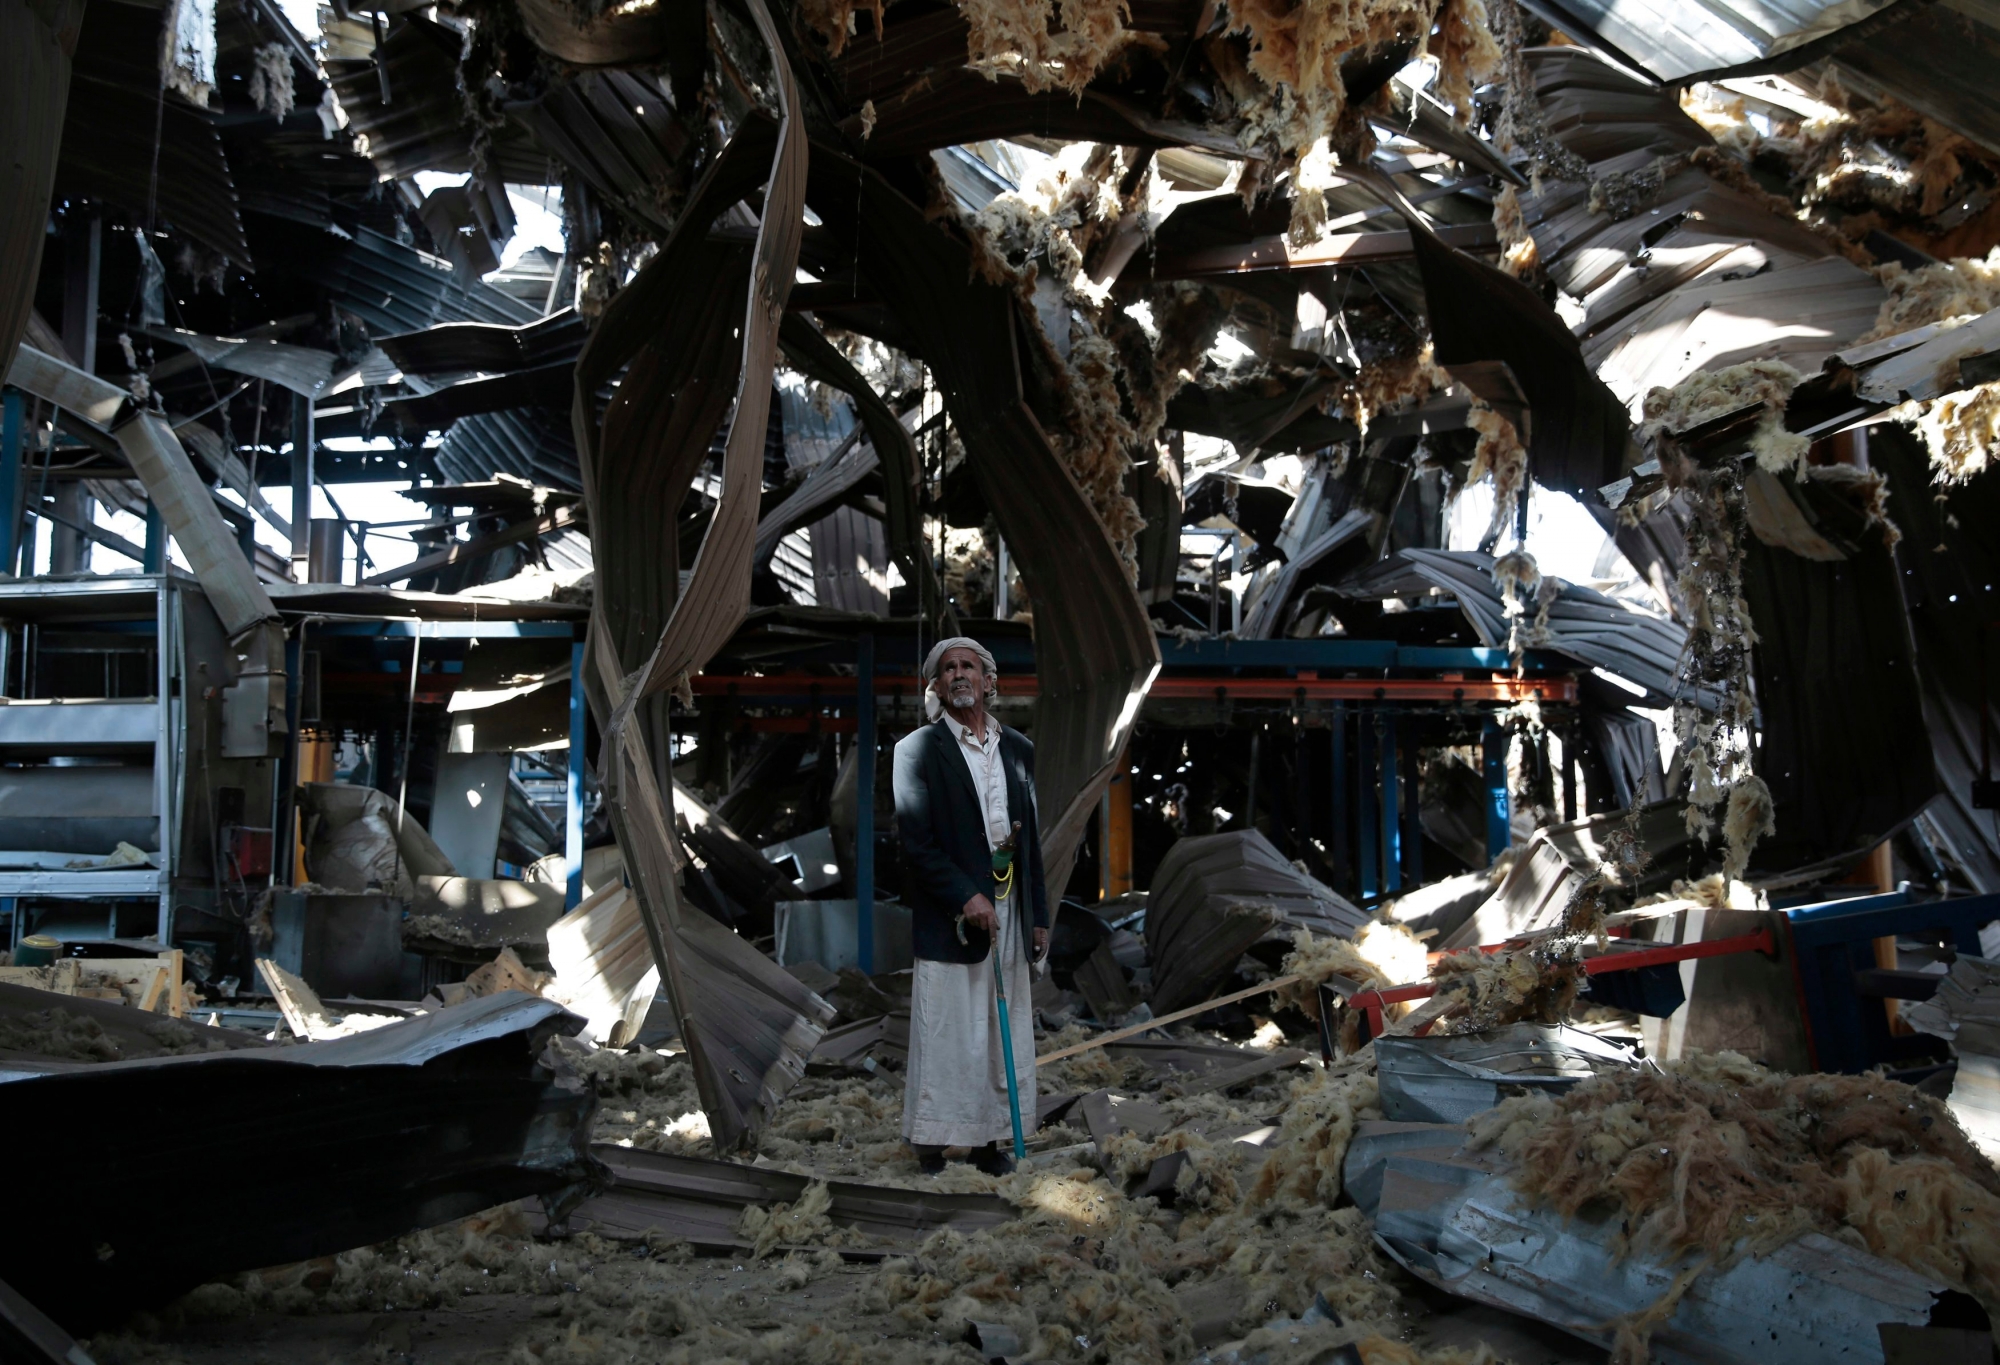 FILE - In this Sept. 22, 2016, file photo, a man stands among the rubble of the Alsonidar Group's water pump and pipe factory after it was hit by Saudi-led airstrikes in Sanaa, Yemen. The Saudi-led coalition fighting in Yemen said early Saturday, Nov. 10, 2018, it had "requested cessation of inflight refueling" by the U.S. for its fighter jets after American officials said they would stop the operations amid growing anger over civilian casualties from the kingdom's airstrikes. (AP Photo/Hani Mohammed, File) Yemen